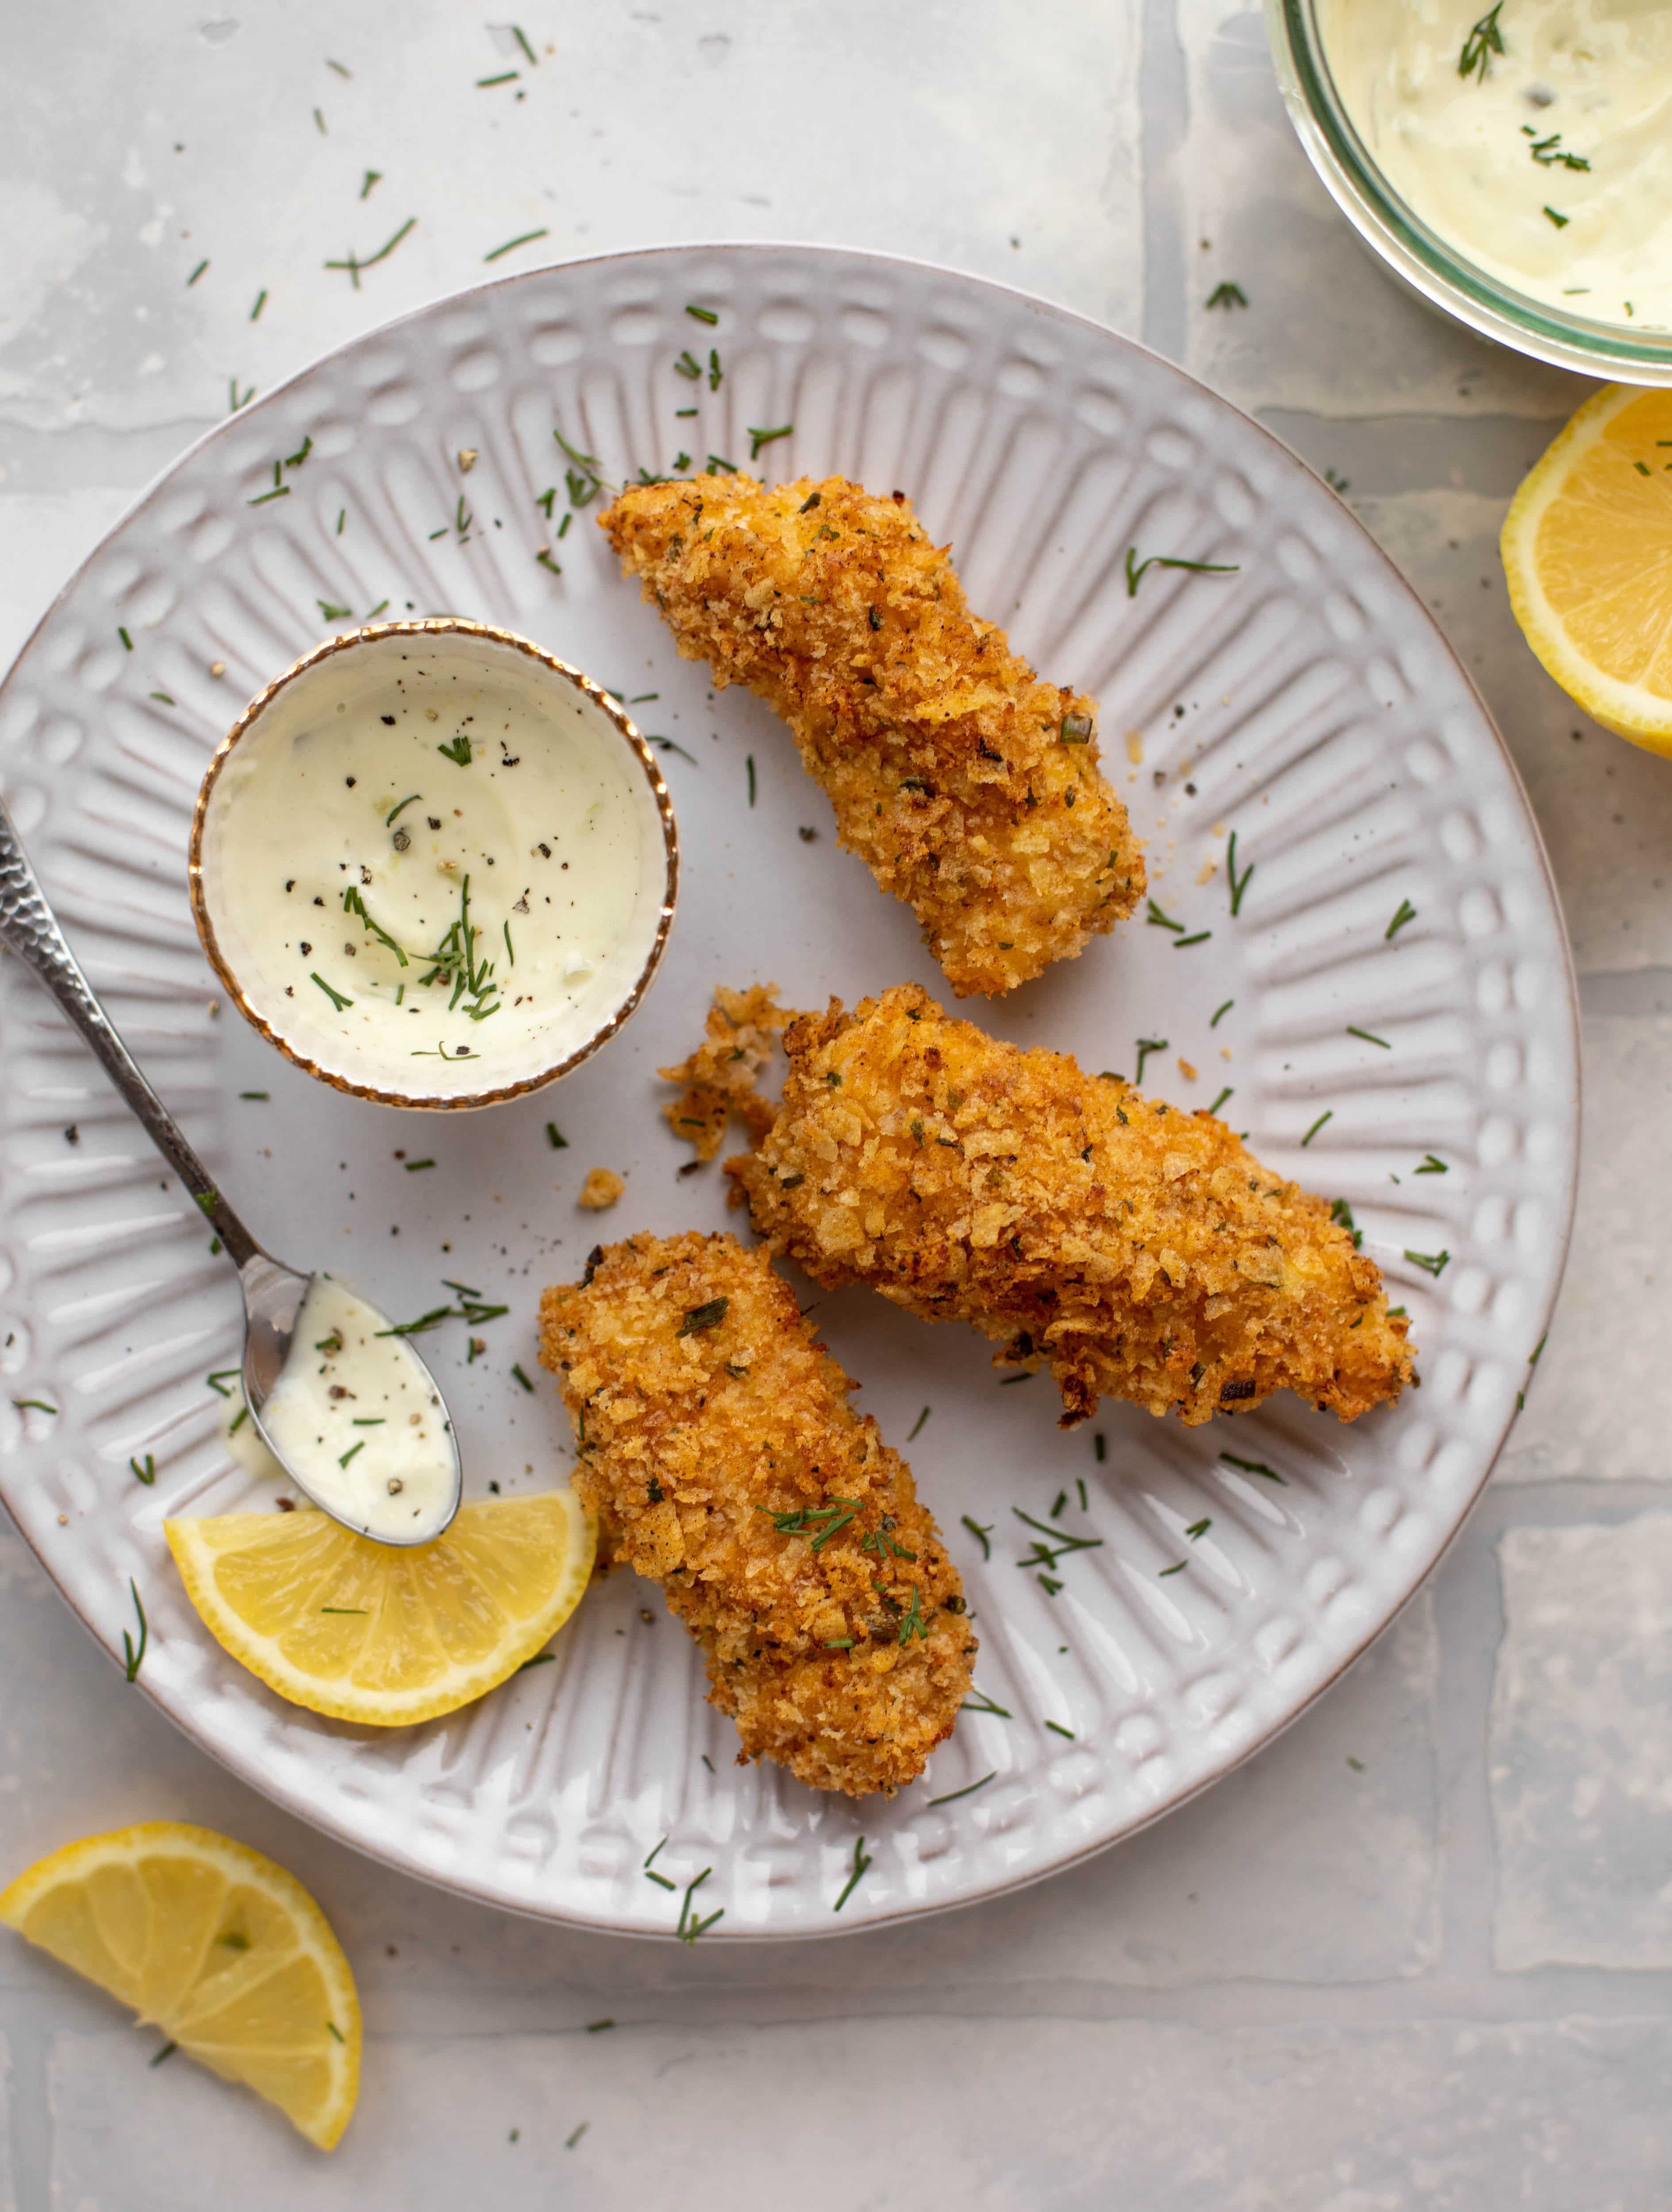 These crispy homemade fish sticks are flavored with lemon and garlic! They are super crunchy and delicious when dipped in the jalapeño tartar sauce.